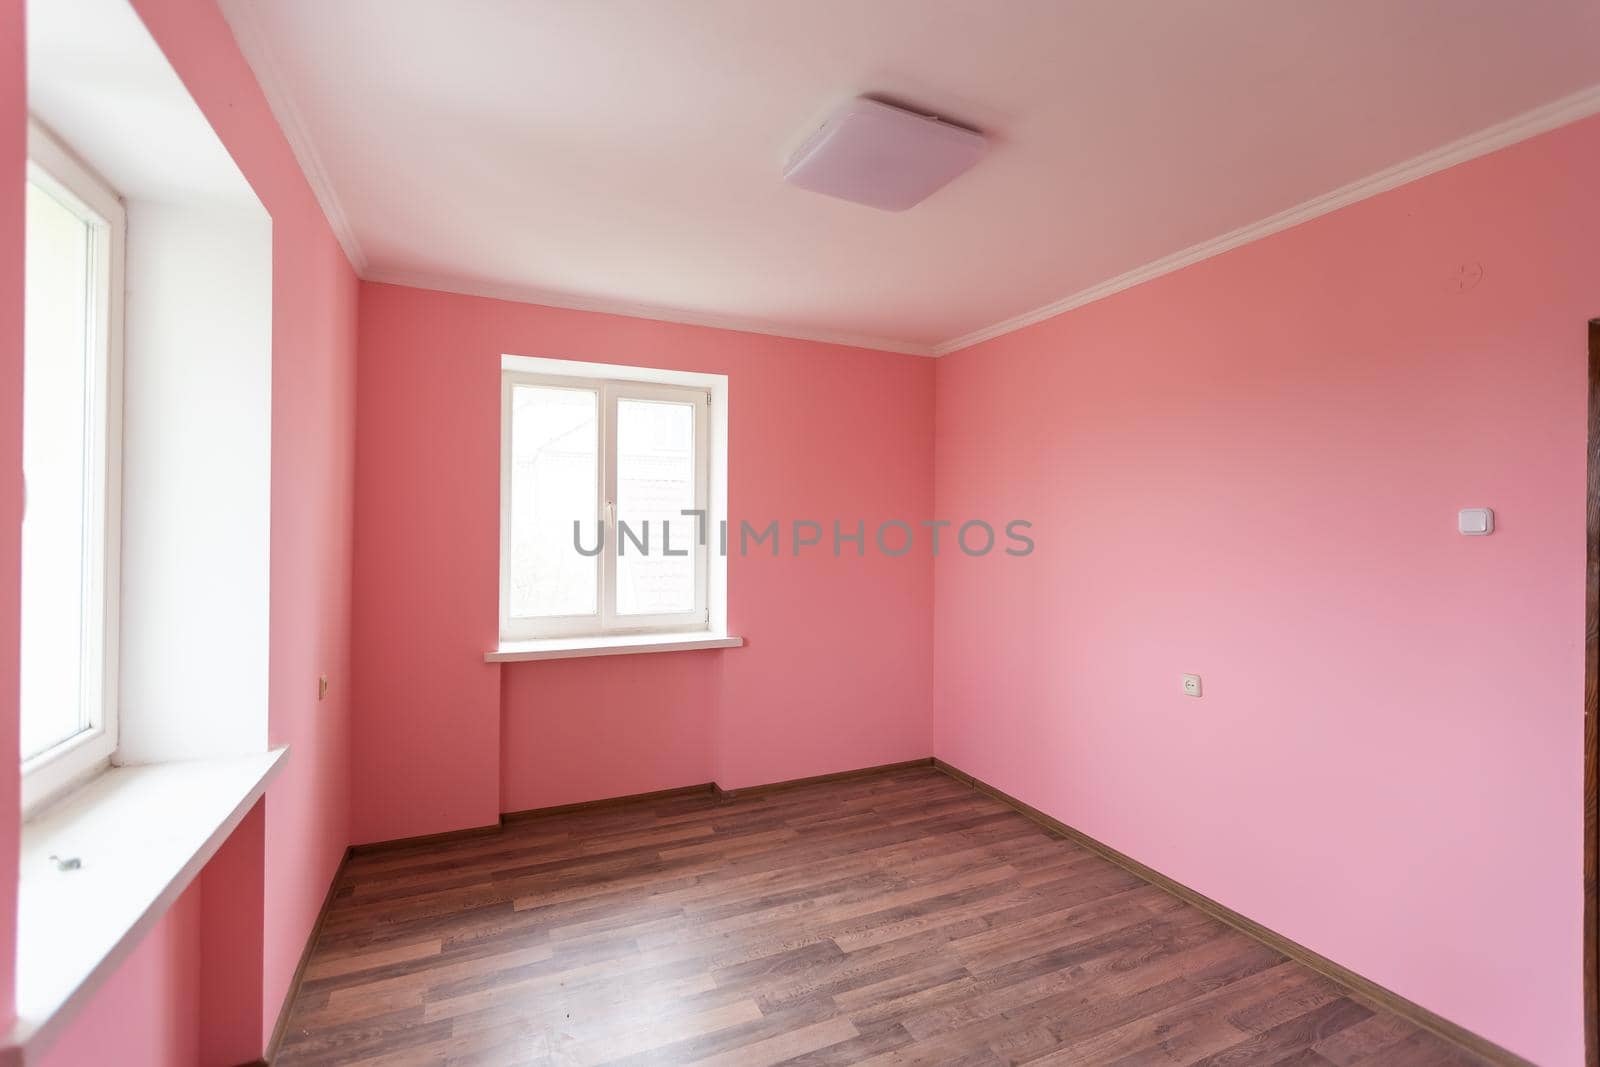 light pink color wall with modern lamp and empty concept and frame. by Andelov13